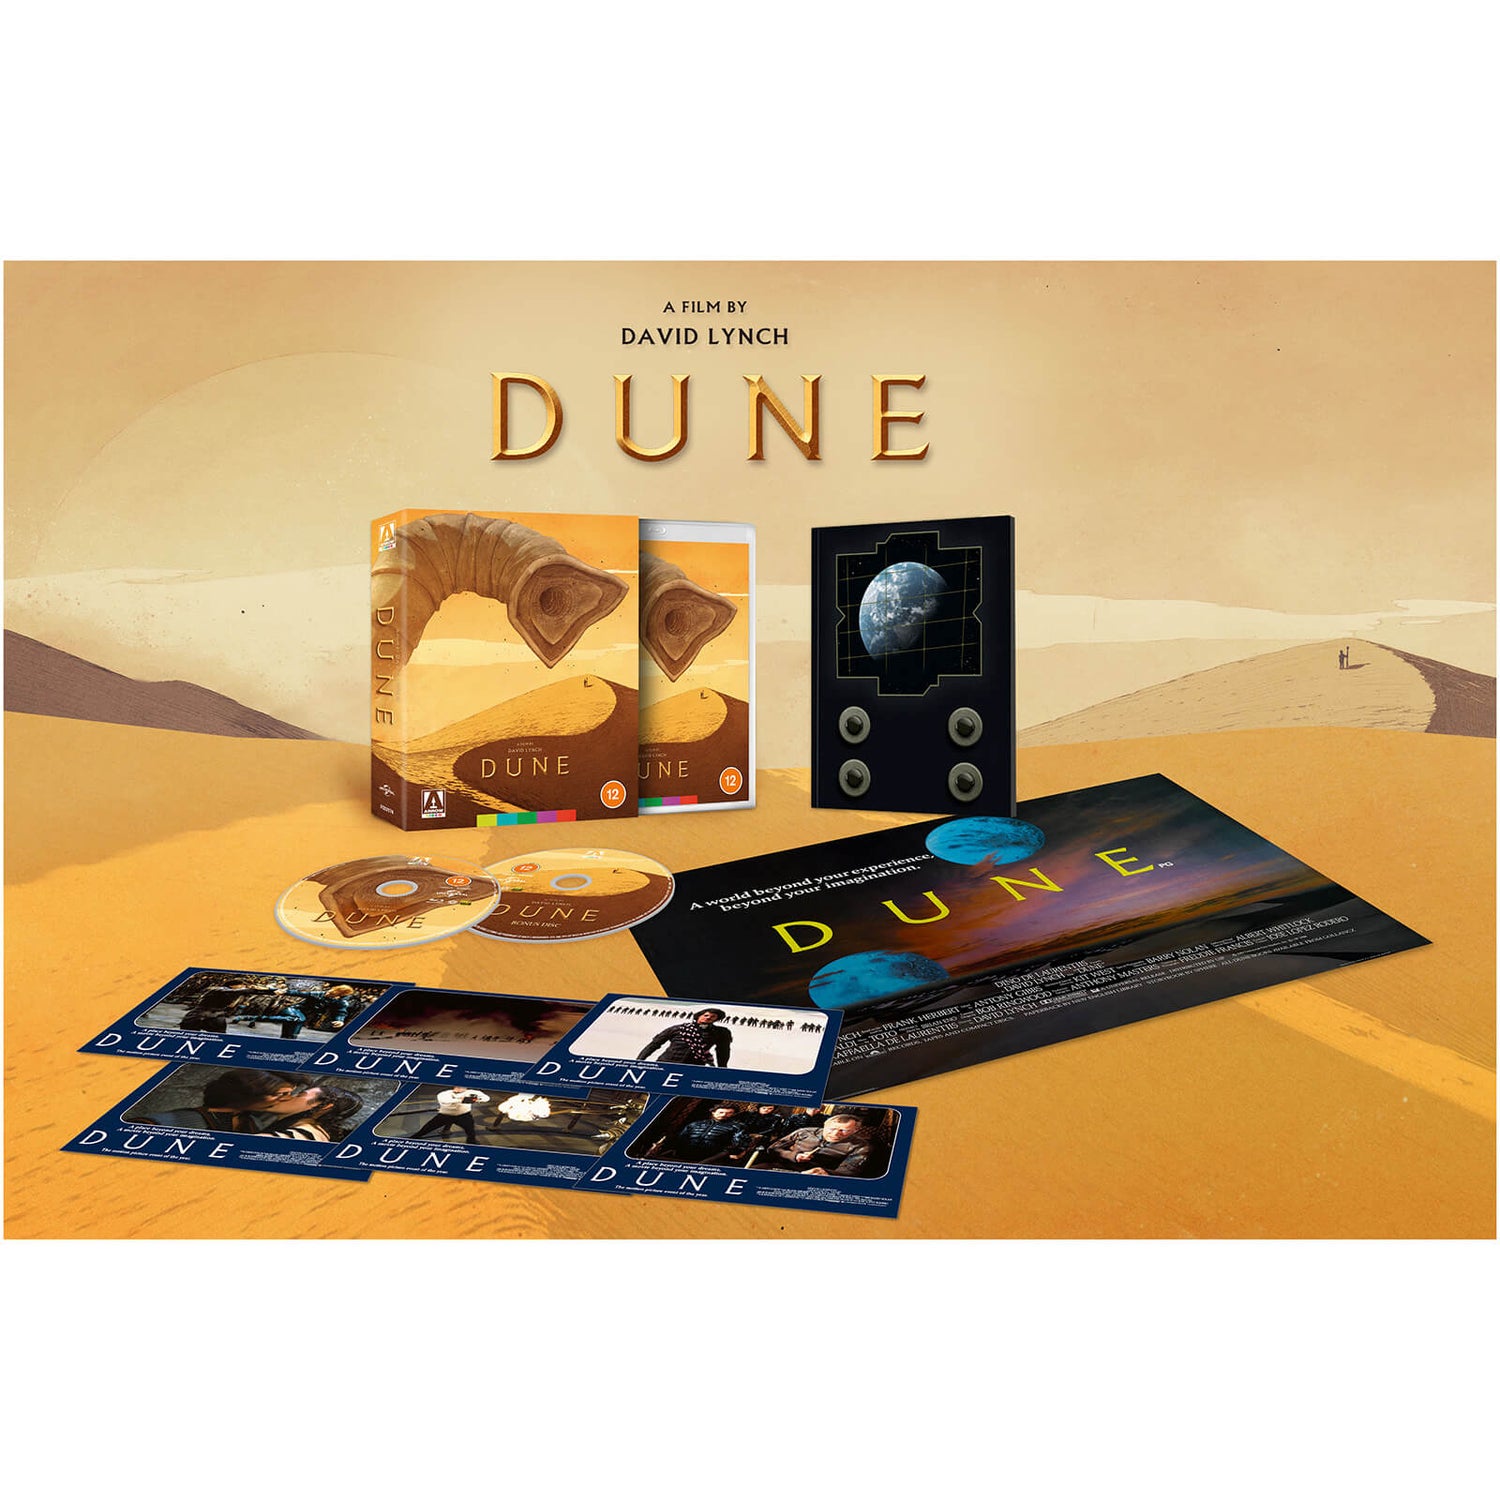 Dune Limited Edition Blu-ray